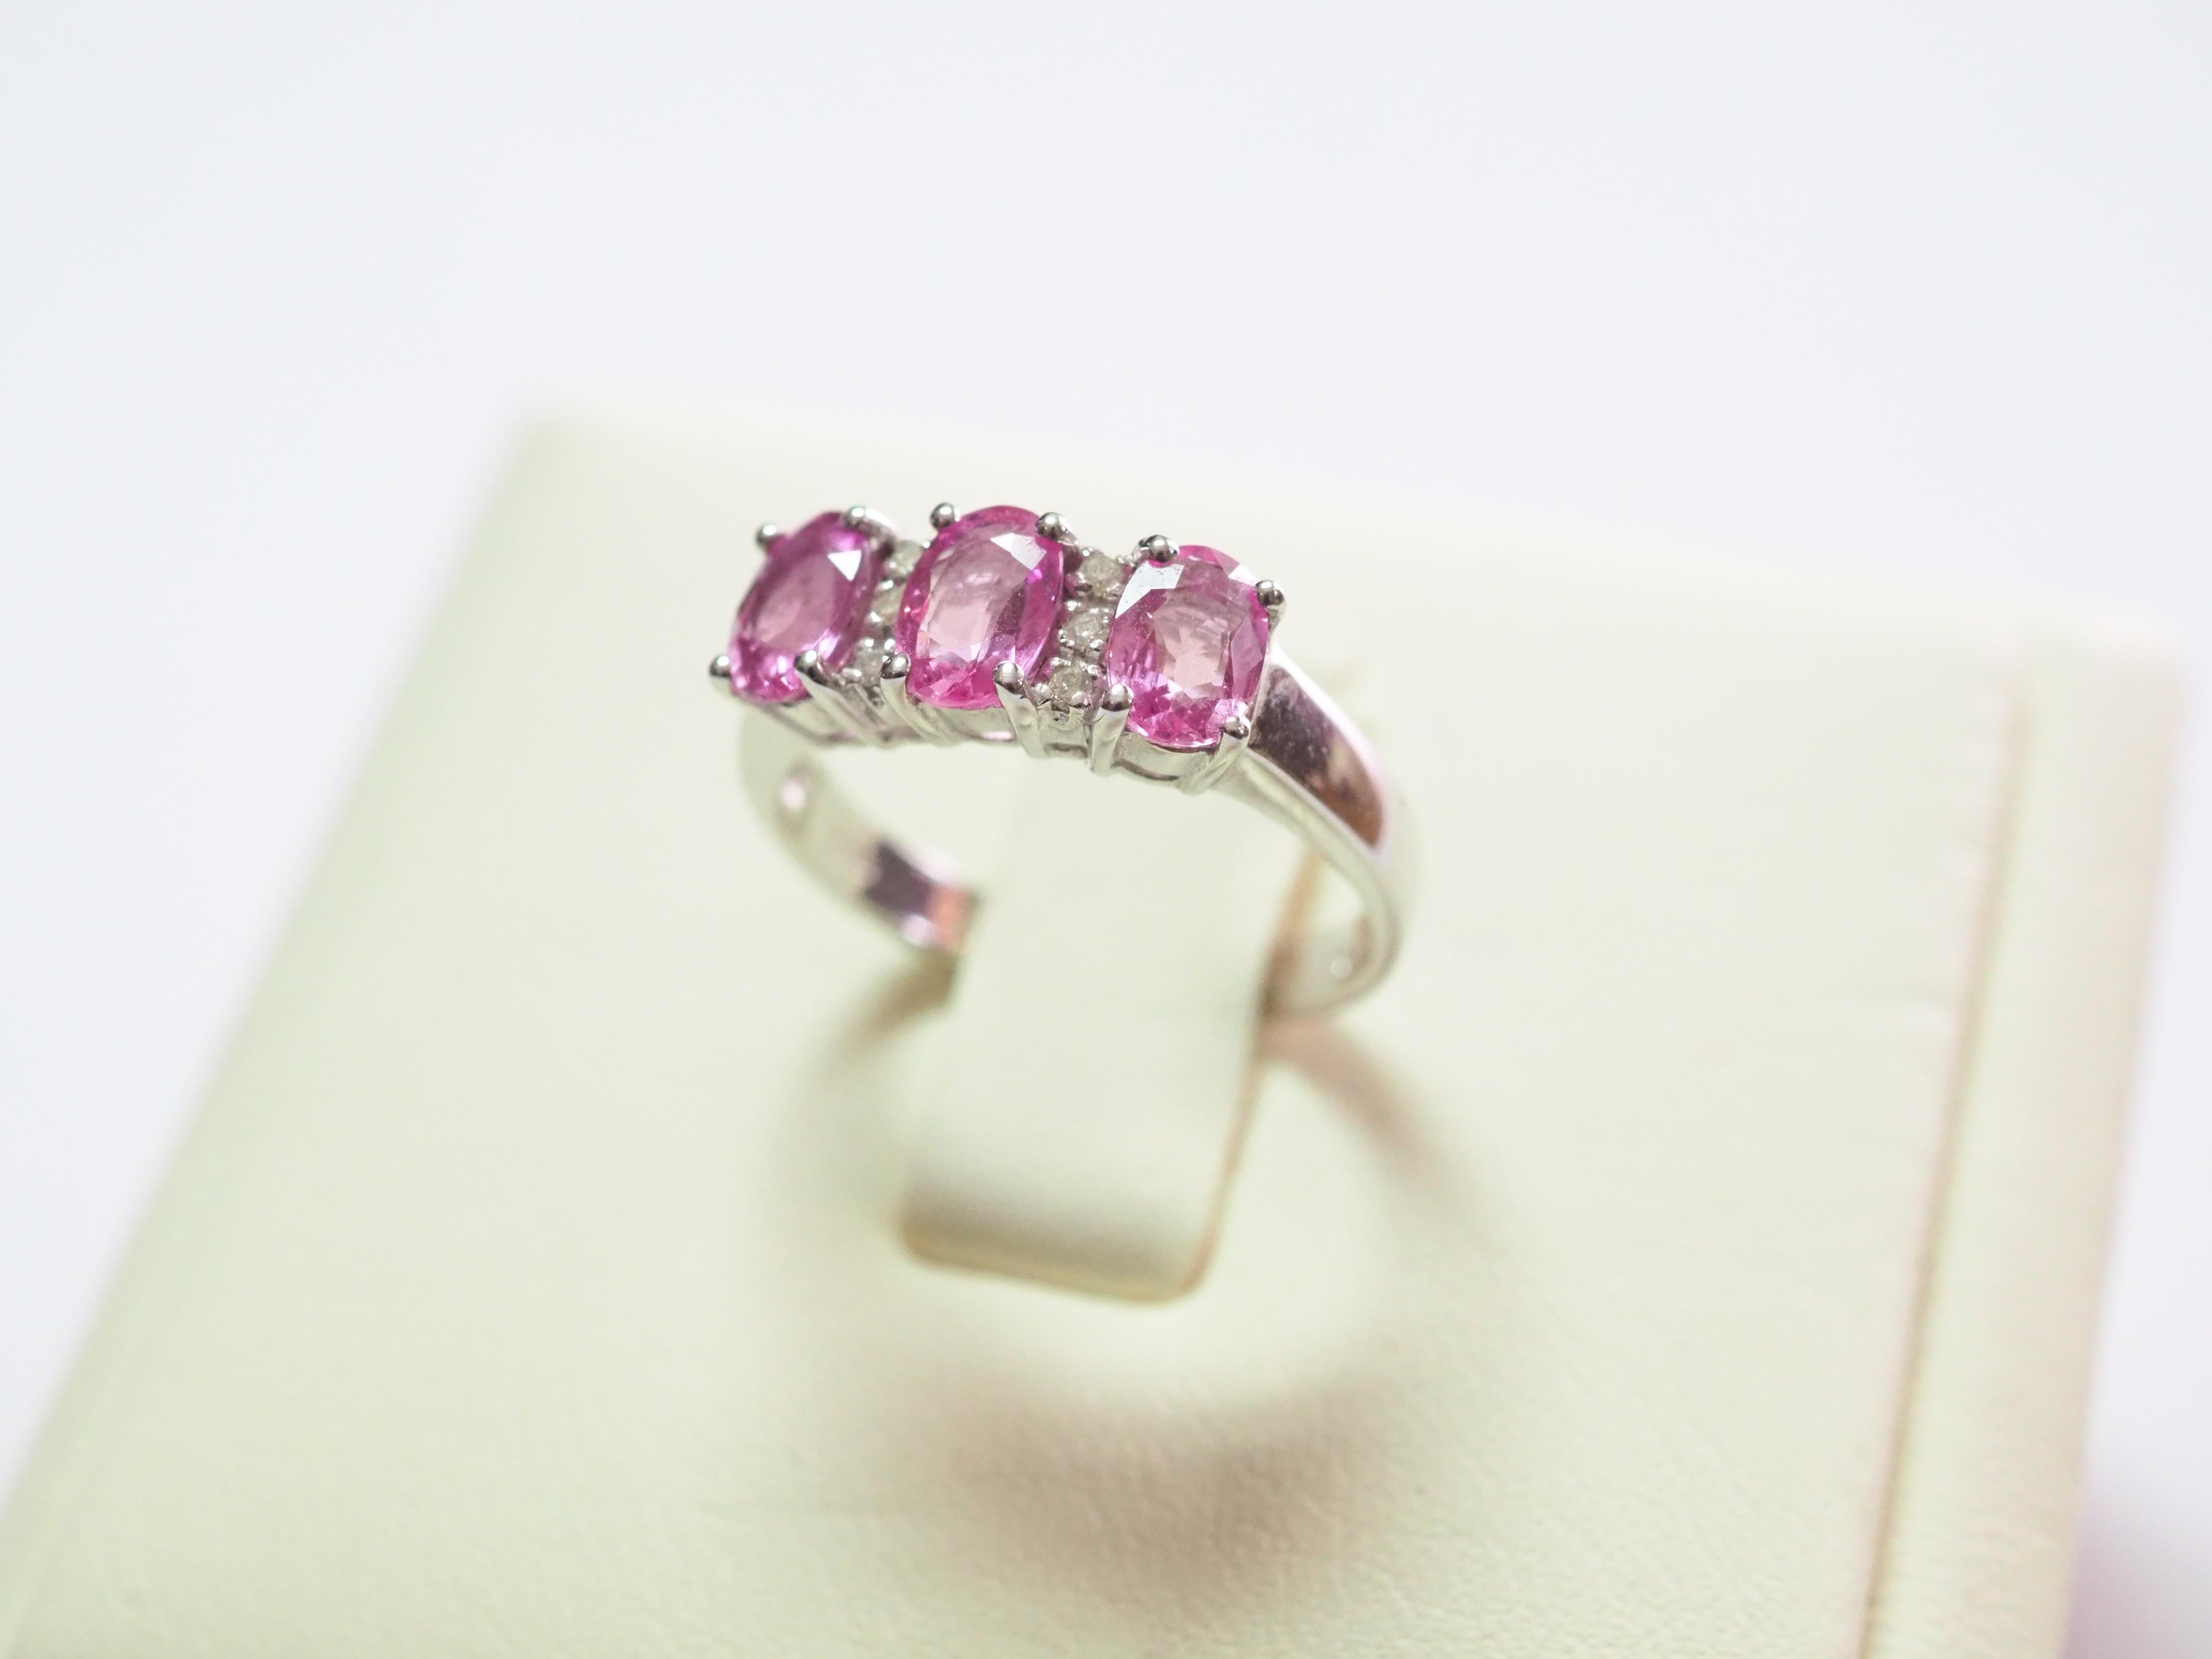 This quality and beautiful engagement piece is an 18K white gold fine quality pink sapphire and diamond ring. 3 bubblegum oval pink sapphires are set meticulously and all the same size with matching colors. There are 4 of round cut diamonds which is